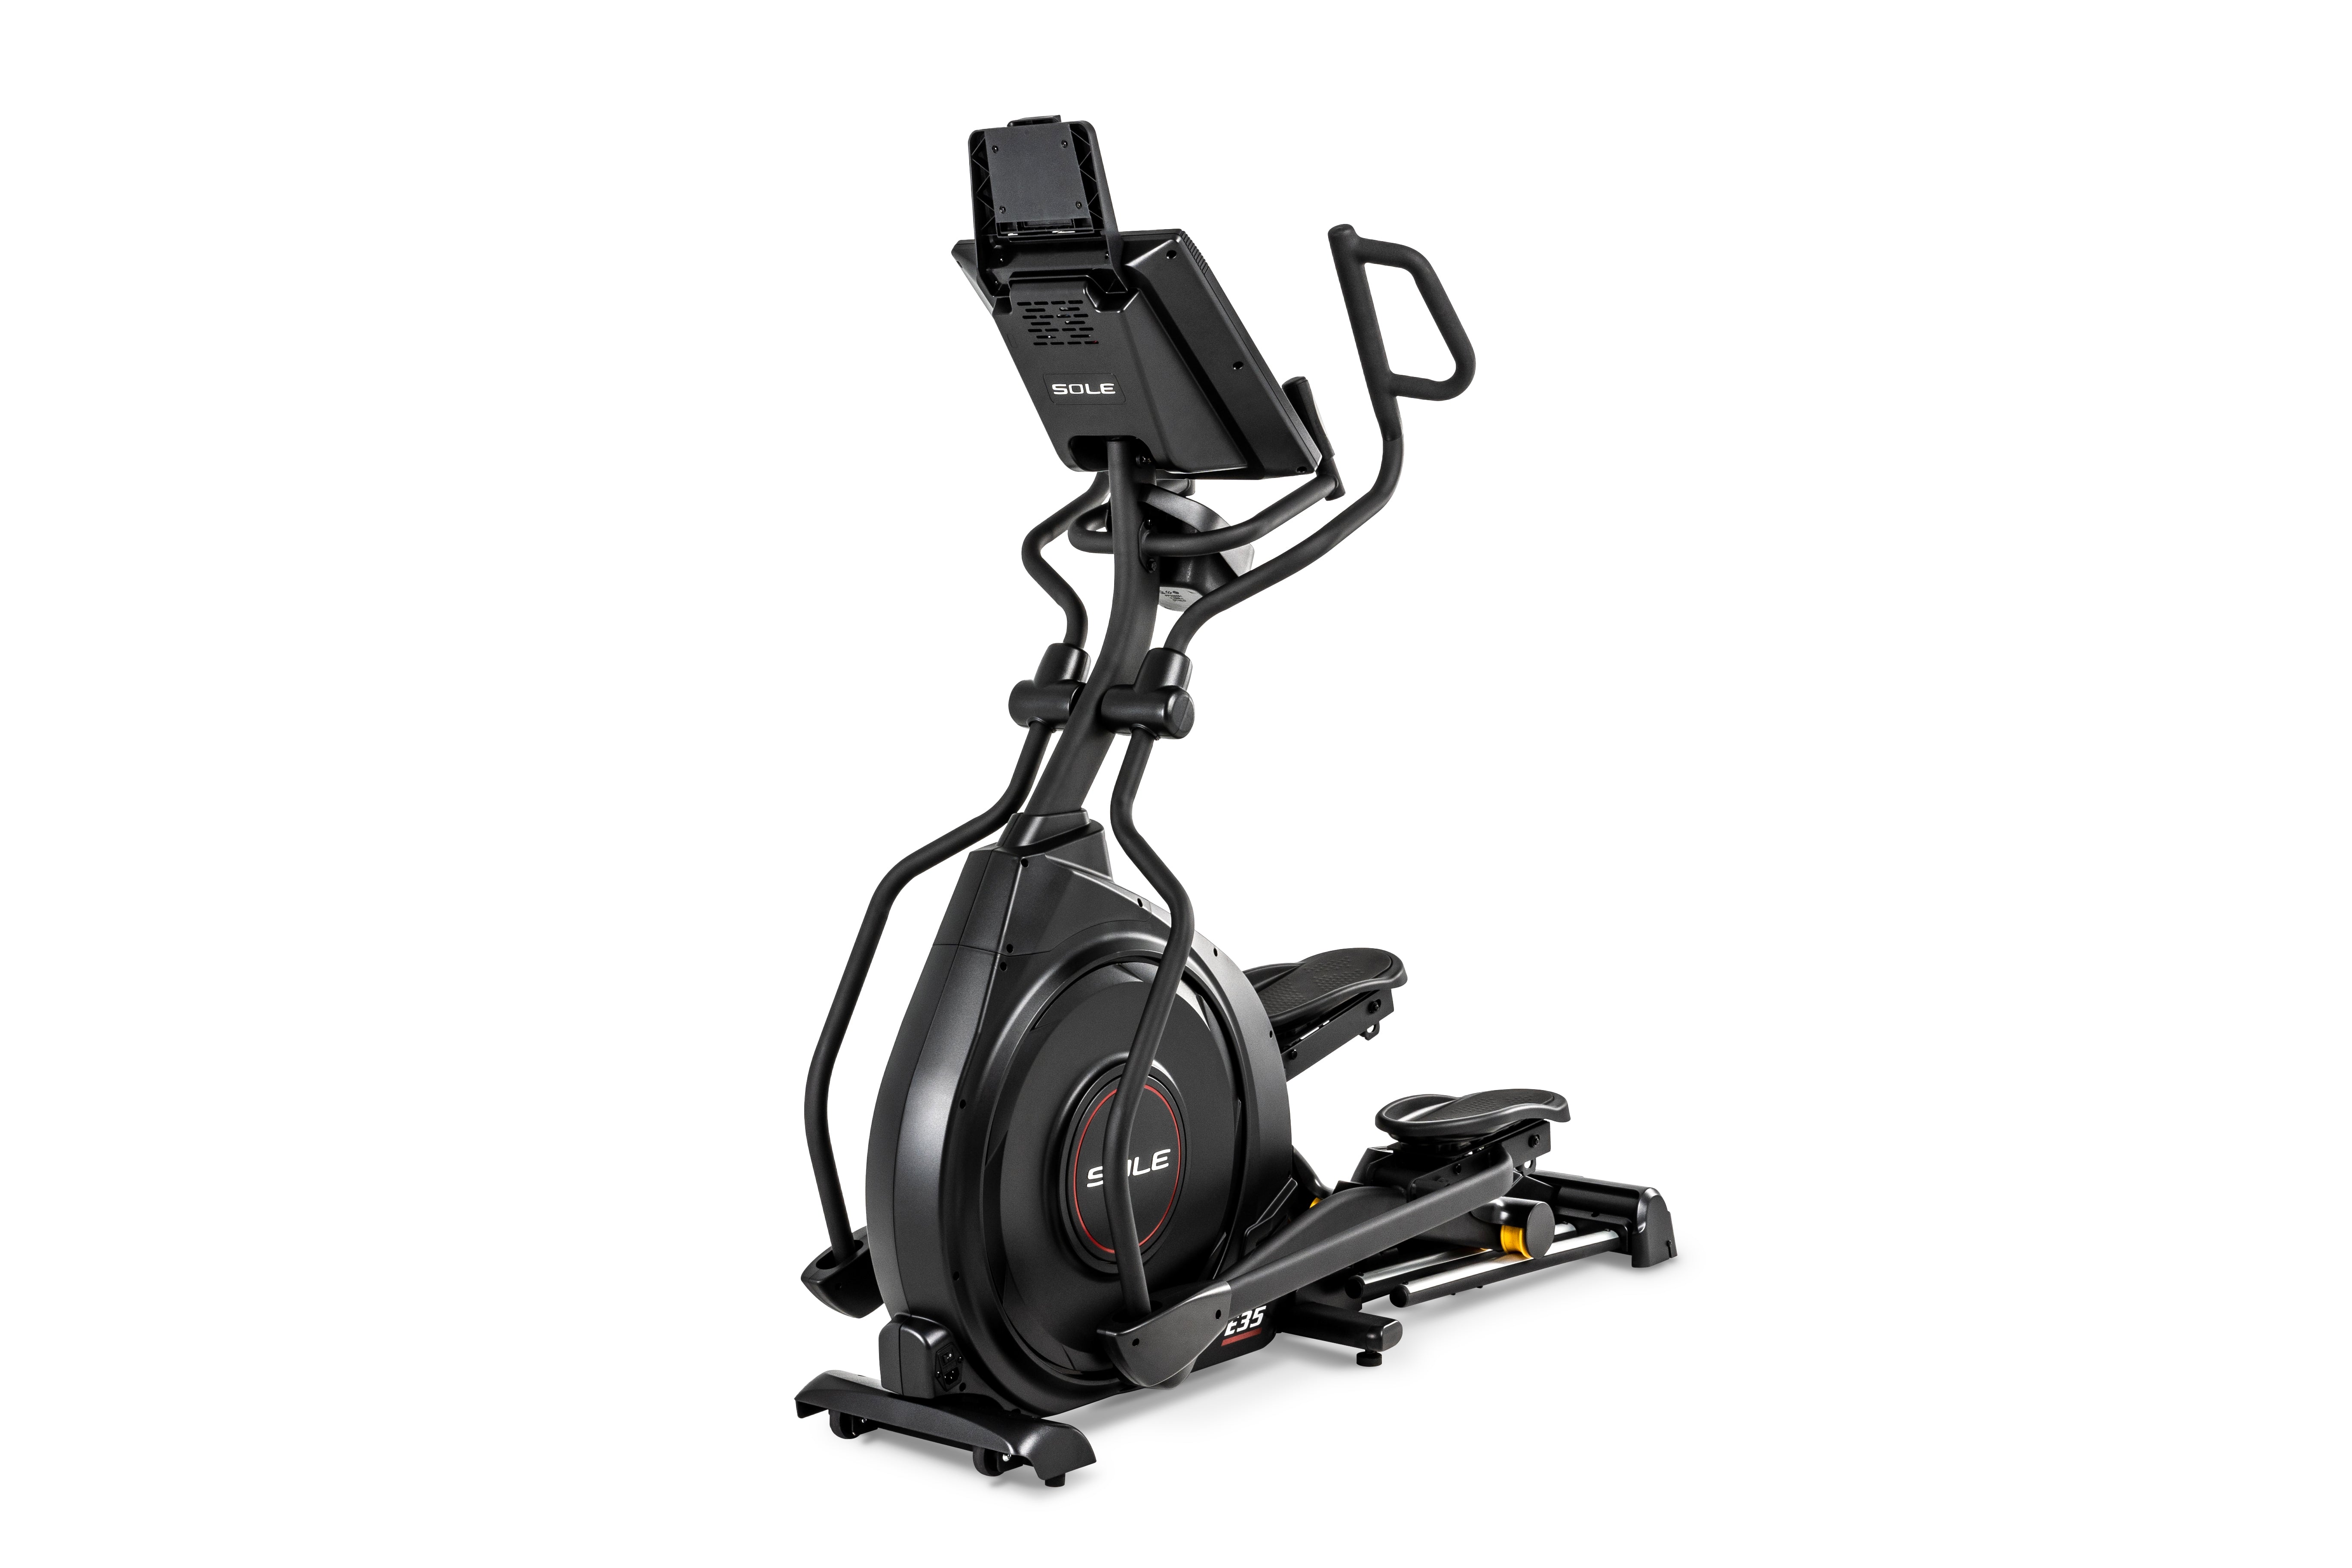 Sole E35 elliptical machine with a prominent display console, curved handlebars, black metallic body, central circular flywheel with 'SOLE' branding, and adjustable footrests. The model number 'E35' is labeled on the bottom front of the frame.